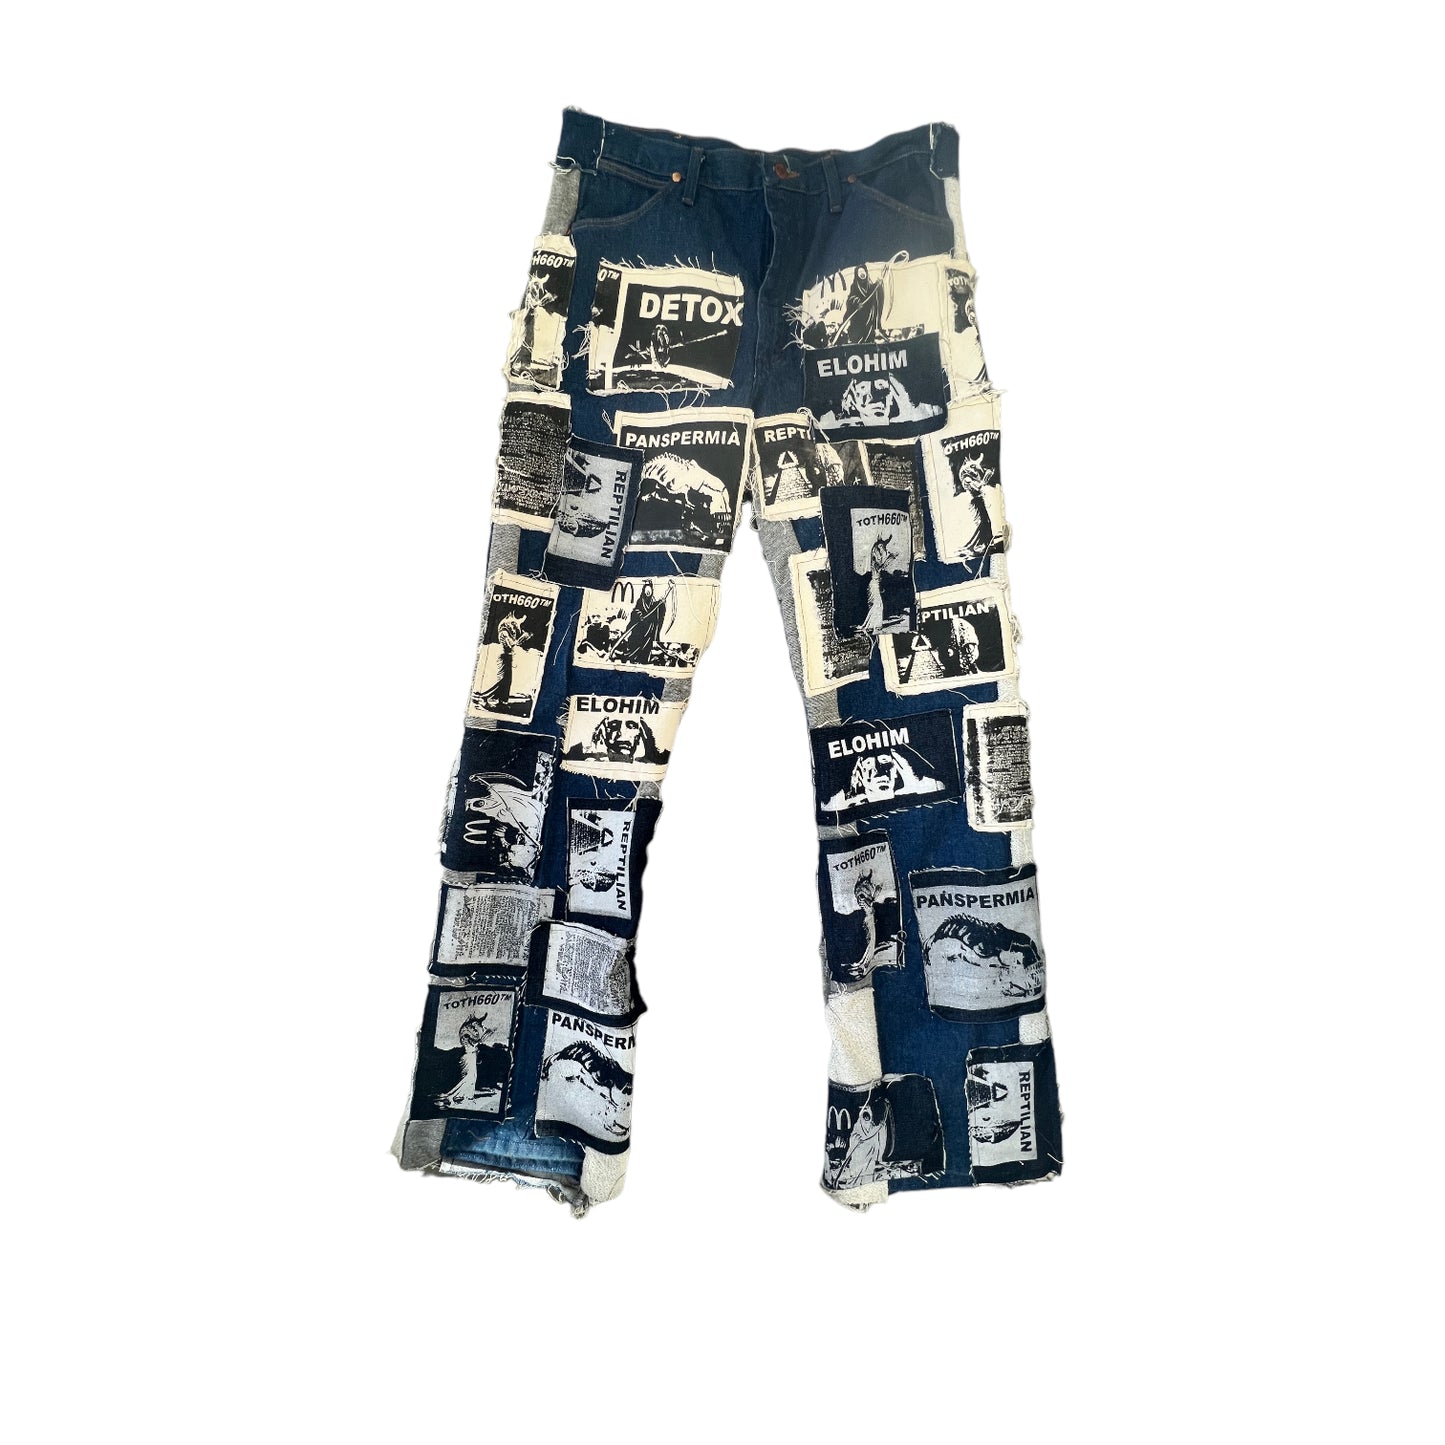 Toth 660 all over Detox Patched denim